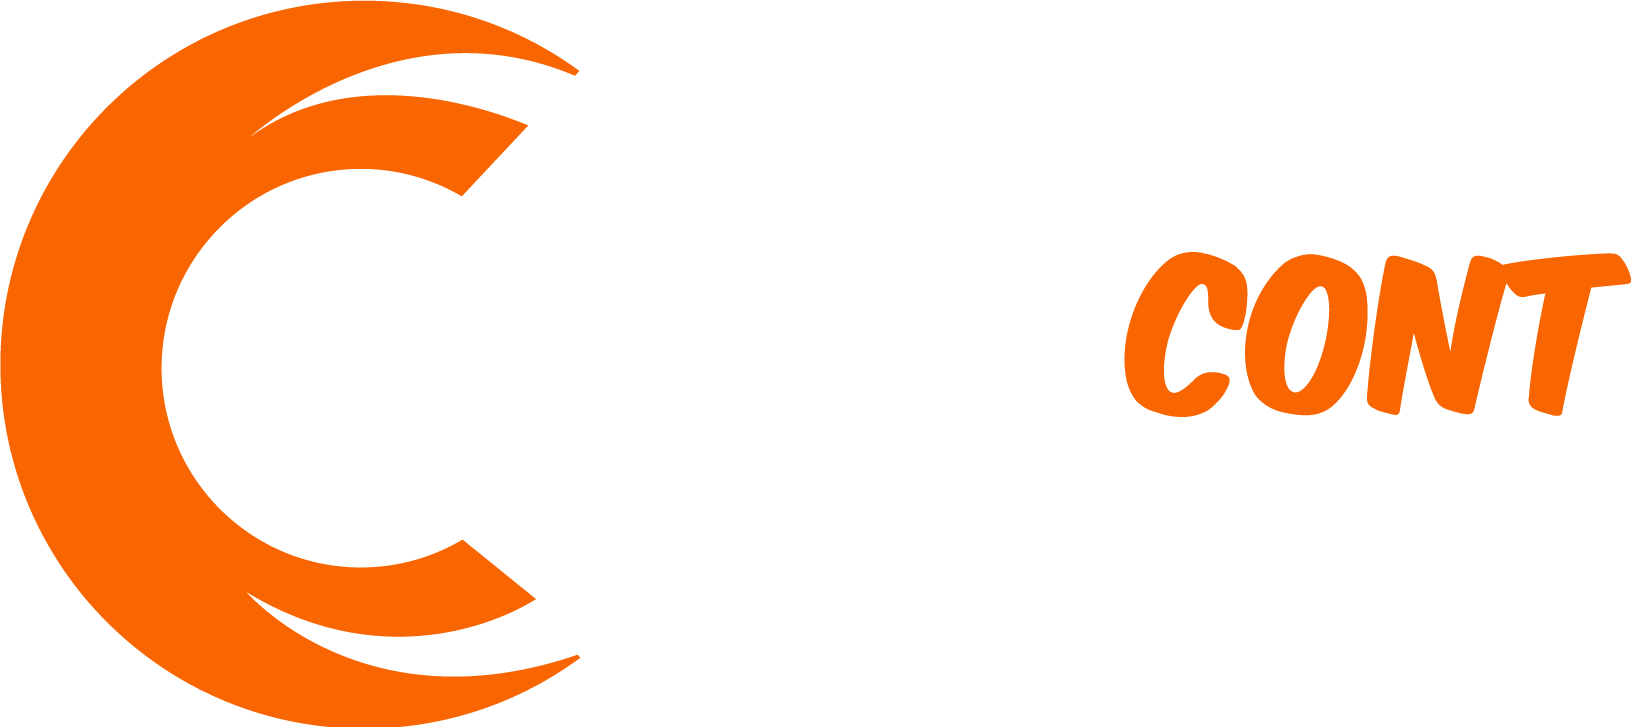 Central Cont